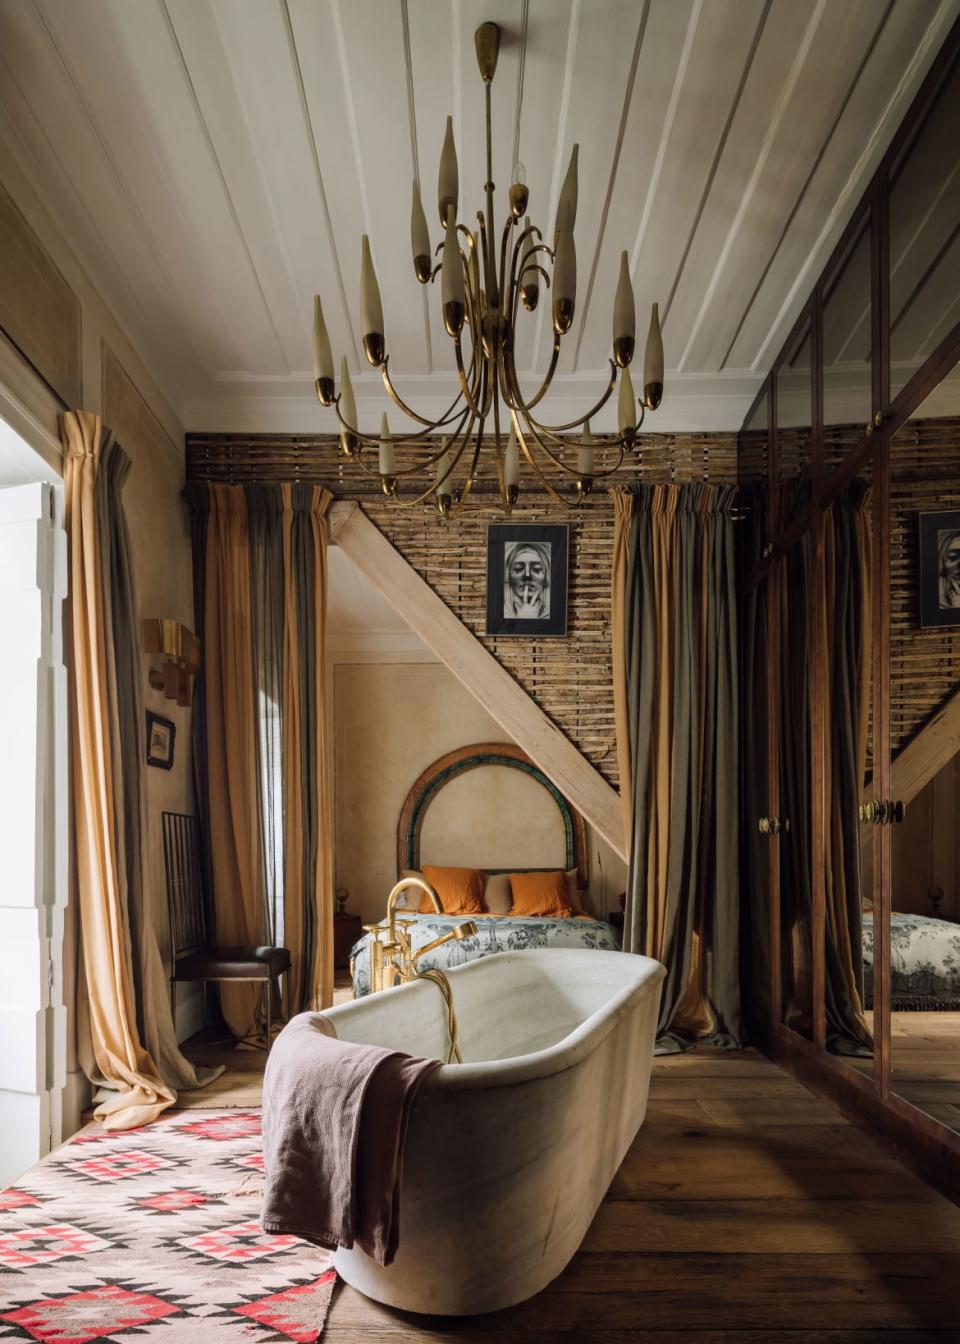 <div class="inline-image__caption"><p>The duplex was recently renovated but it still maintains its vintage charm…which is what we like to call a bathroom that garnishes its sinfully deep soaking tub with a gilded chandelier. Now, where’s the butler with my flute of bubbly? </p></div> <div class="inline-image__credit">Christie’s International Real Estate</div>